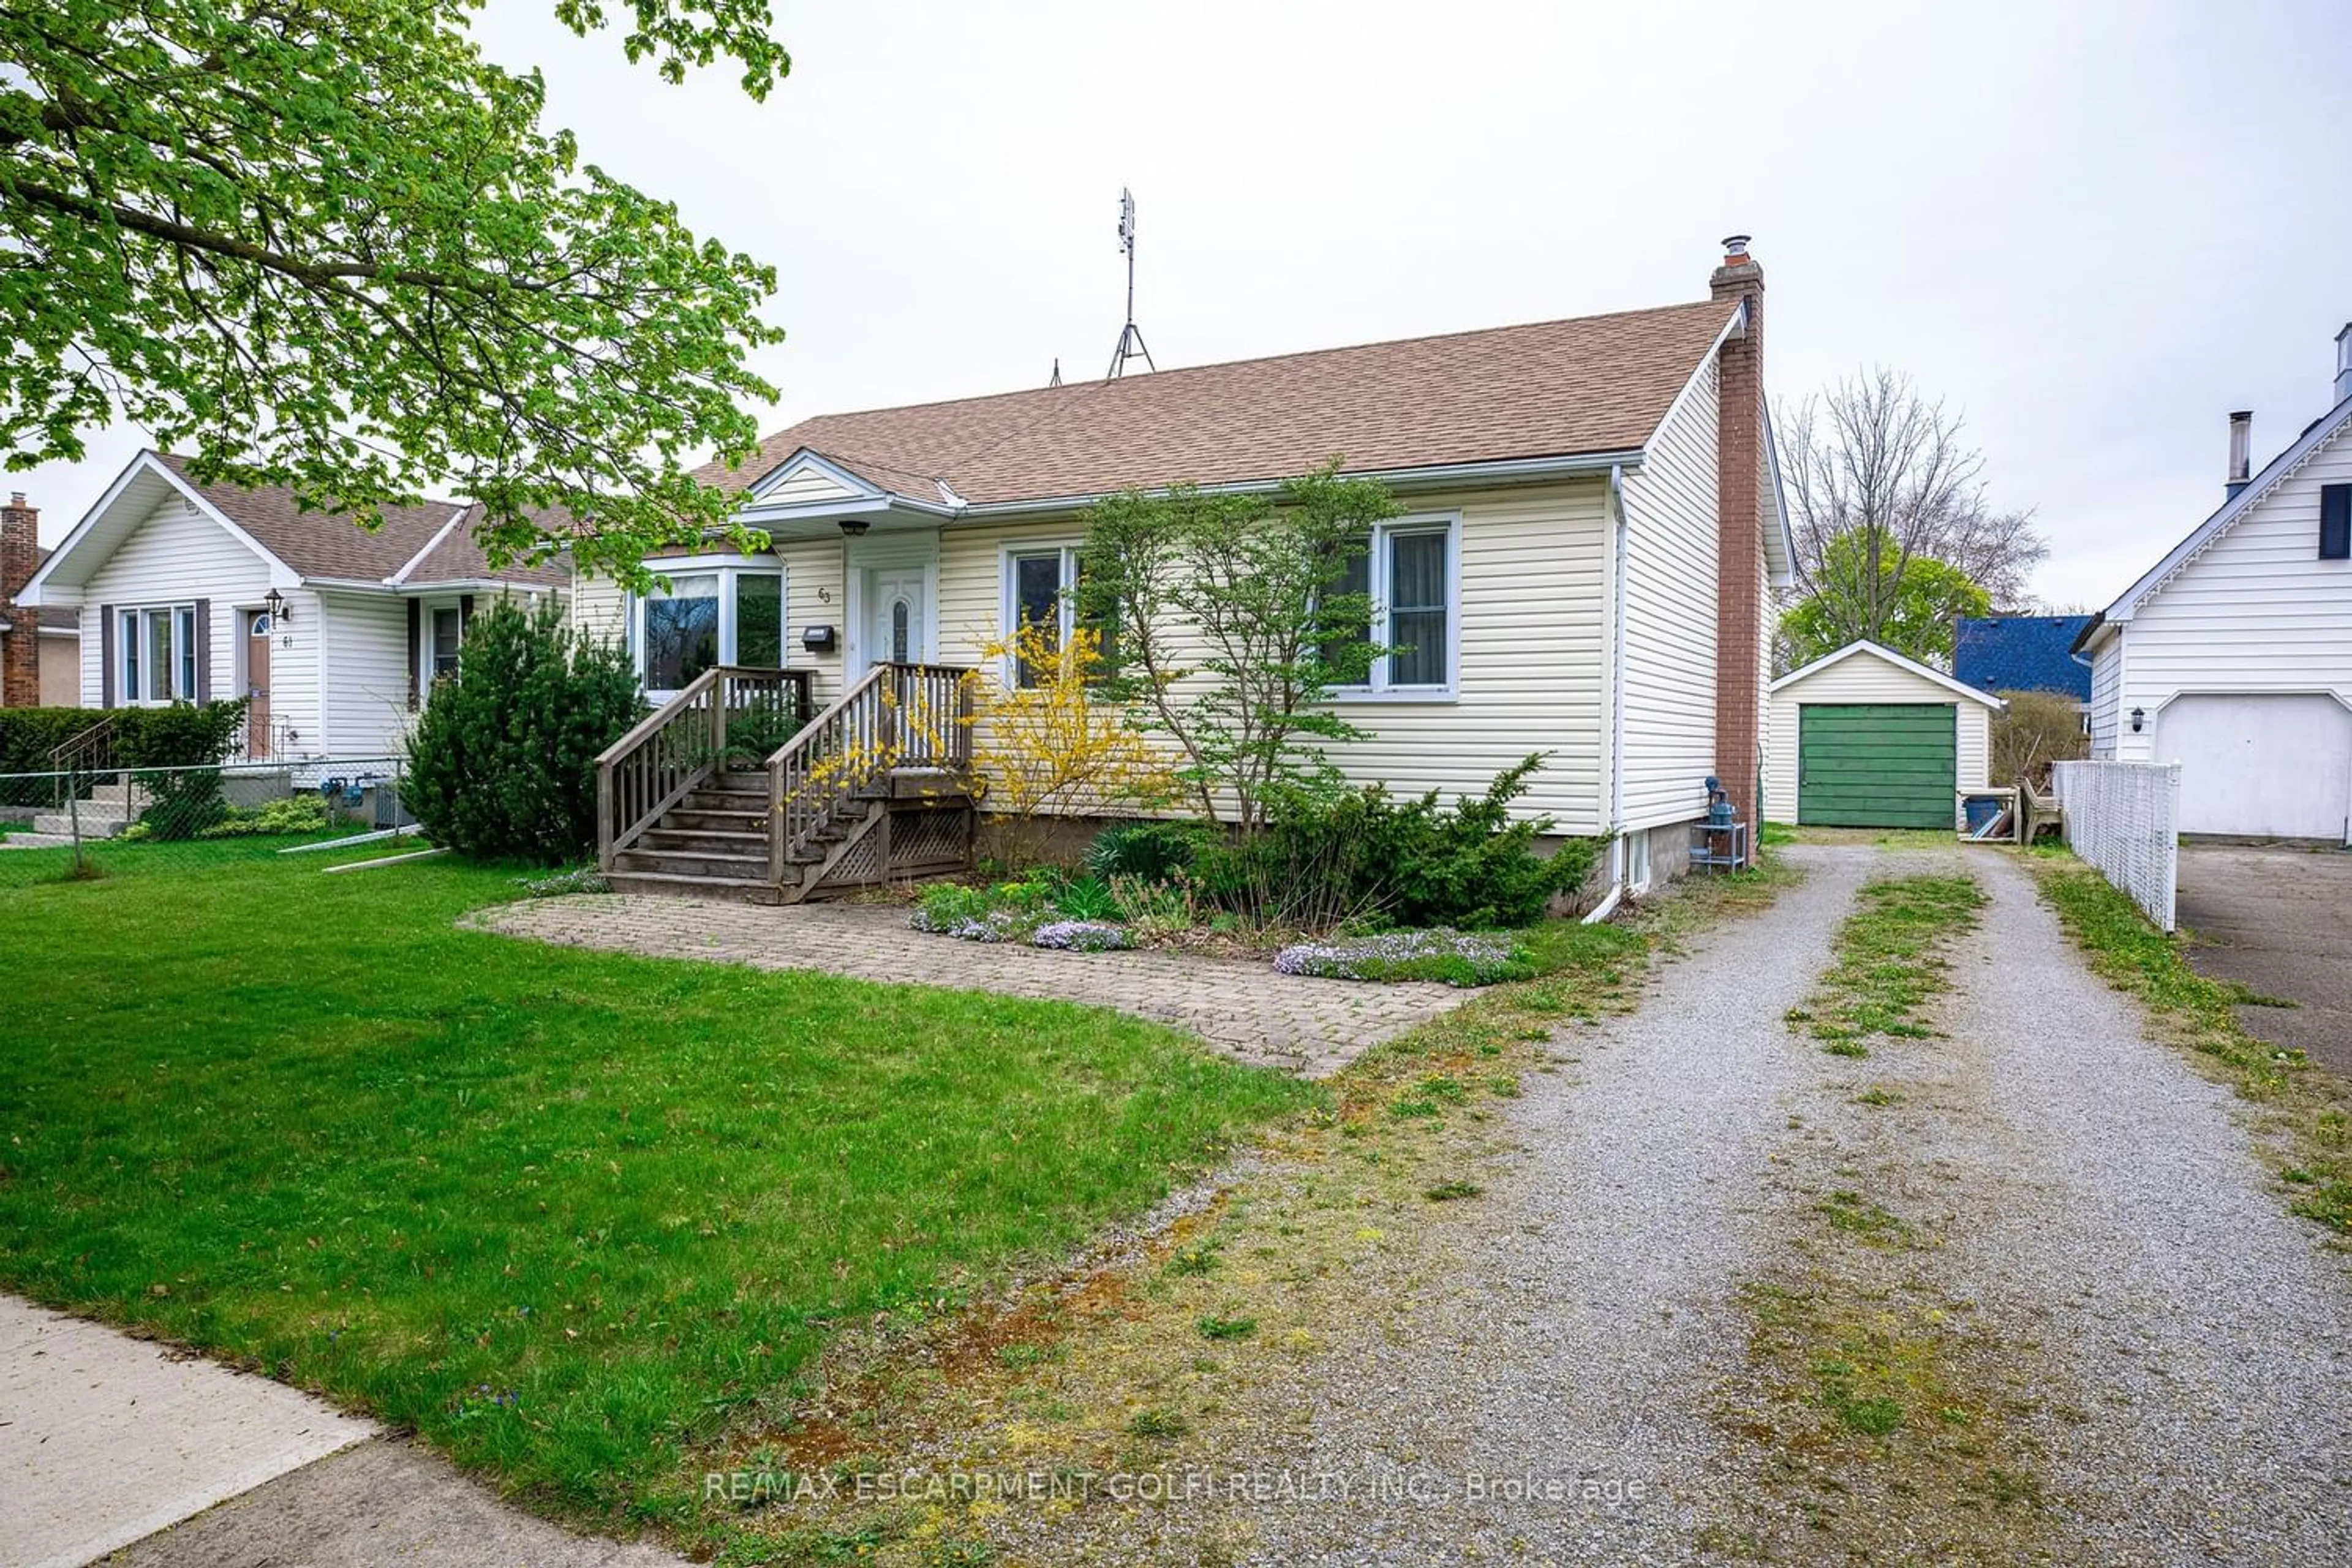 Cottage for 63 Else St, St. Catharines Ontario L2N 2C2